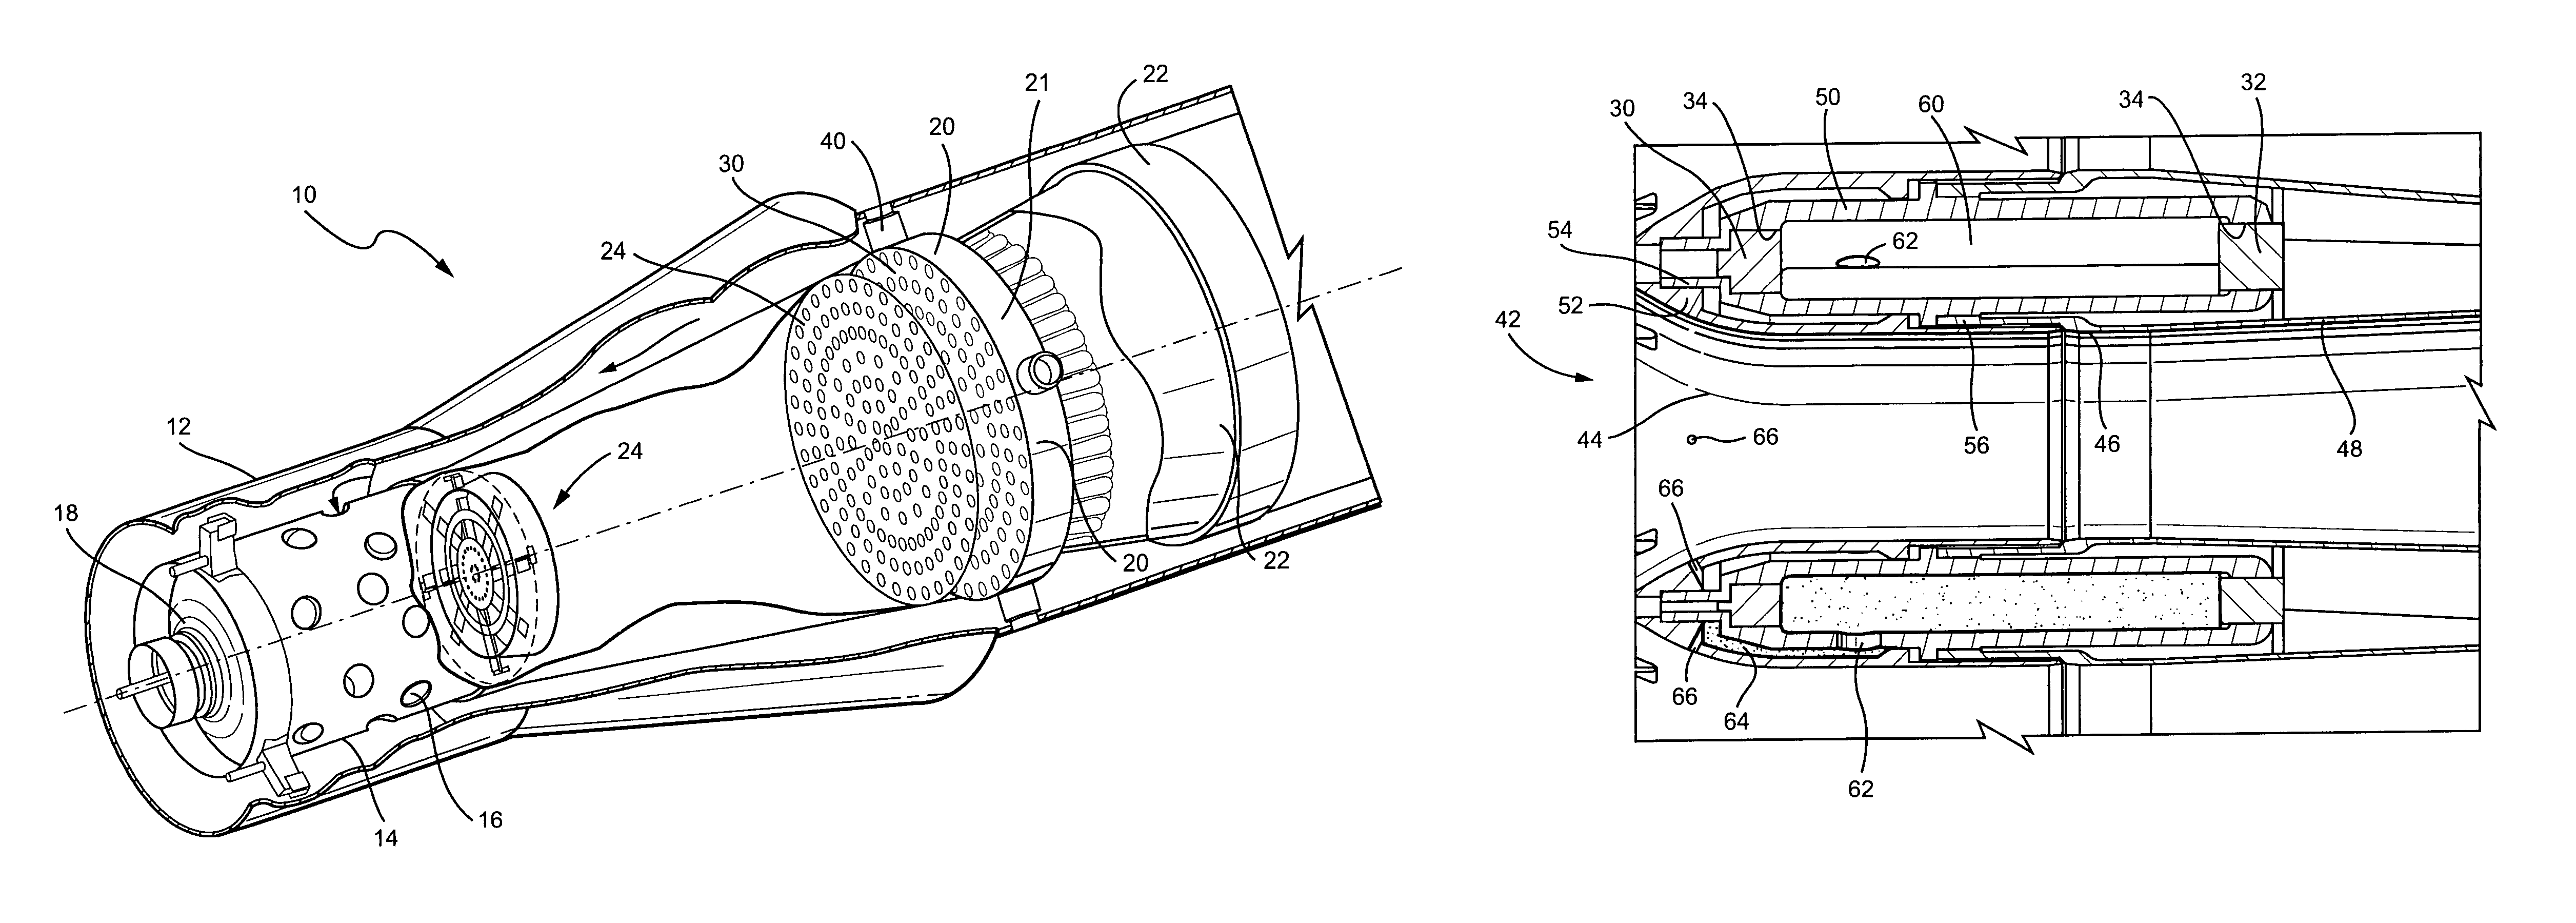 Multi-sided diffuser for a venturi in a fuel injector for a gas turbine